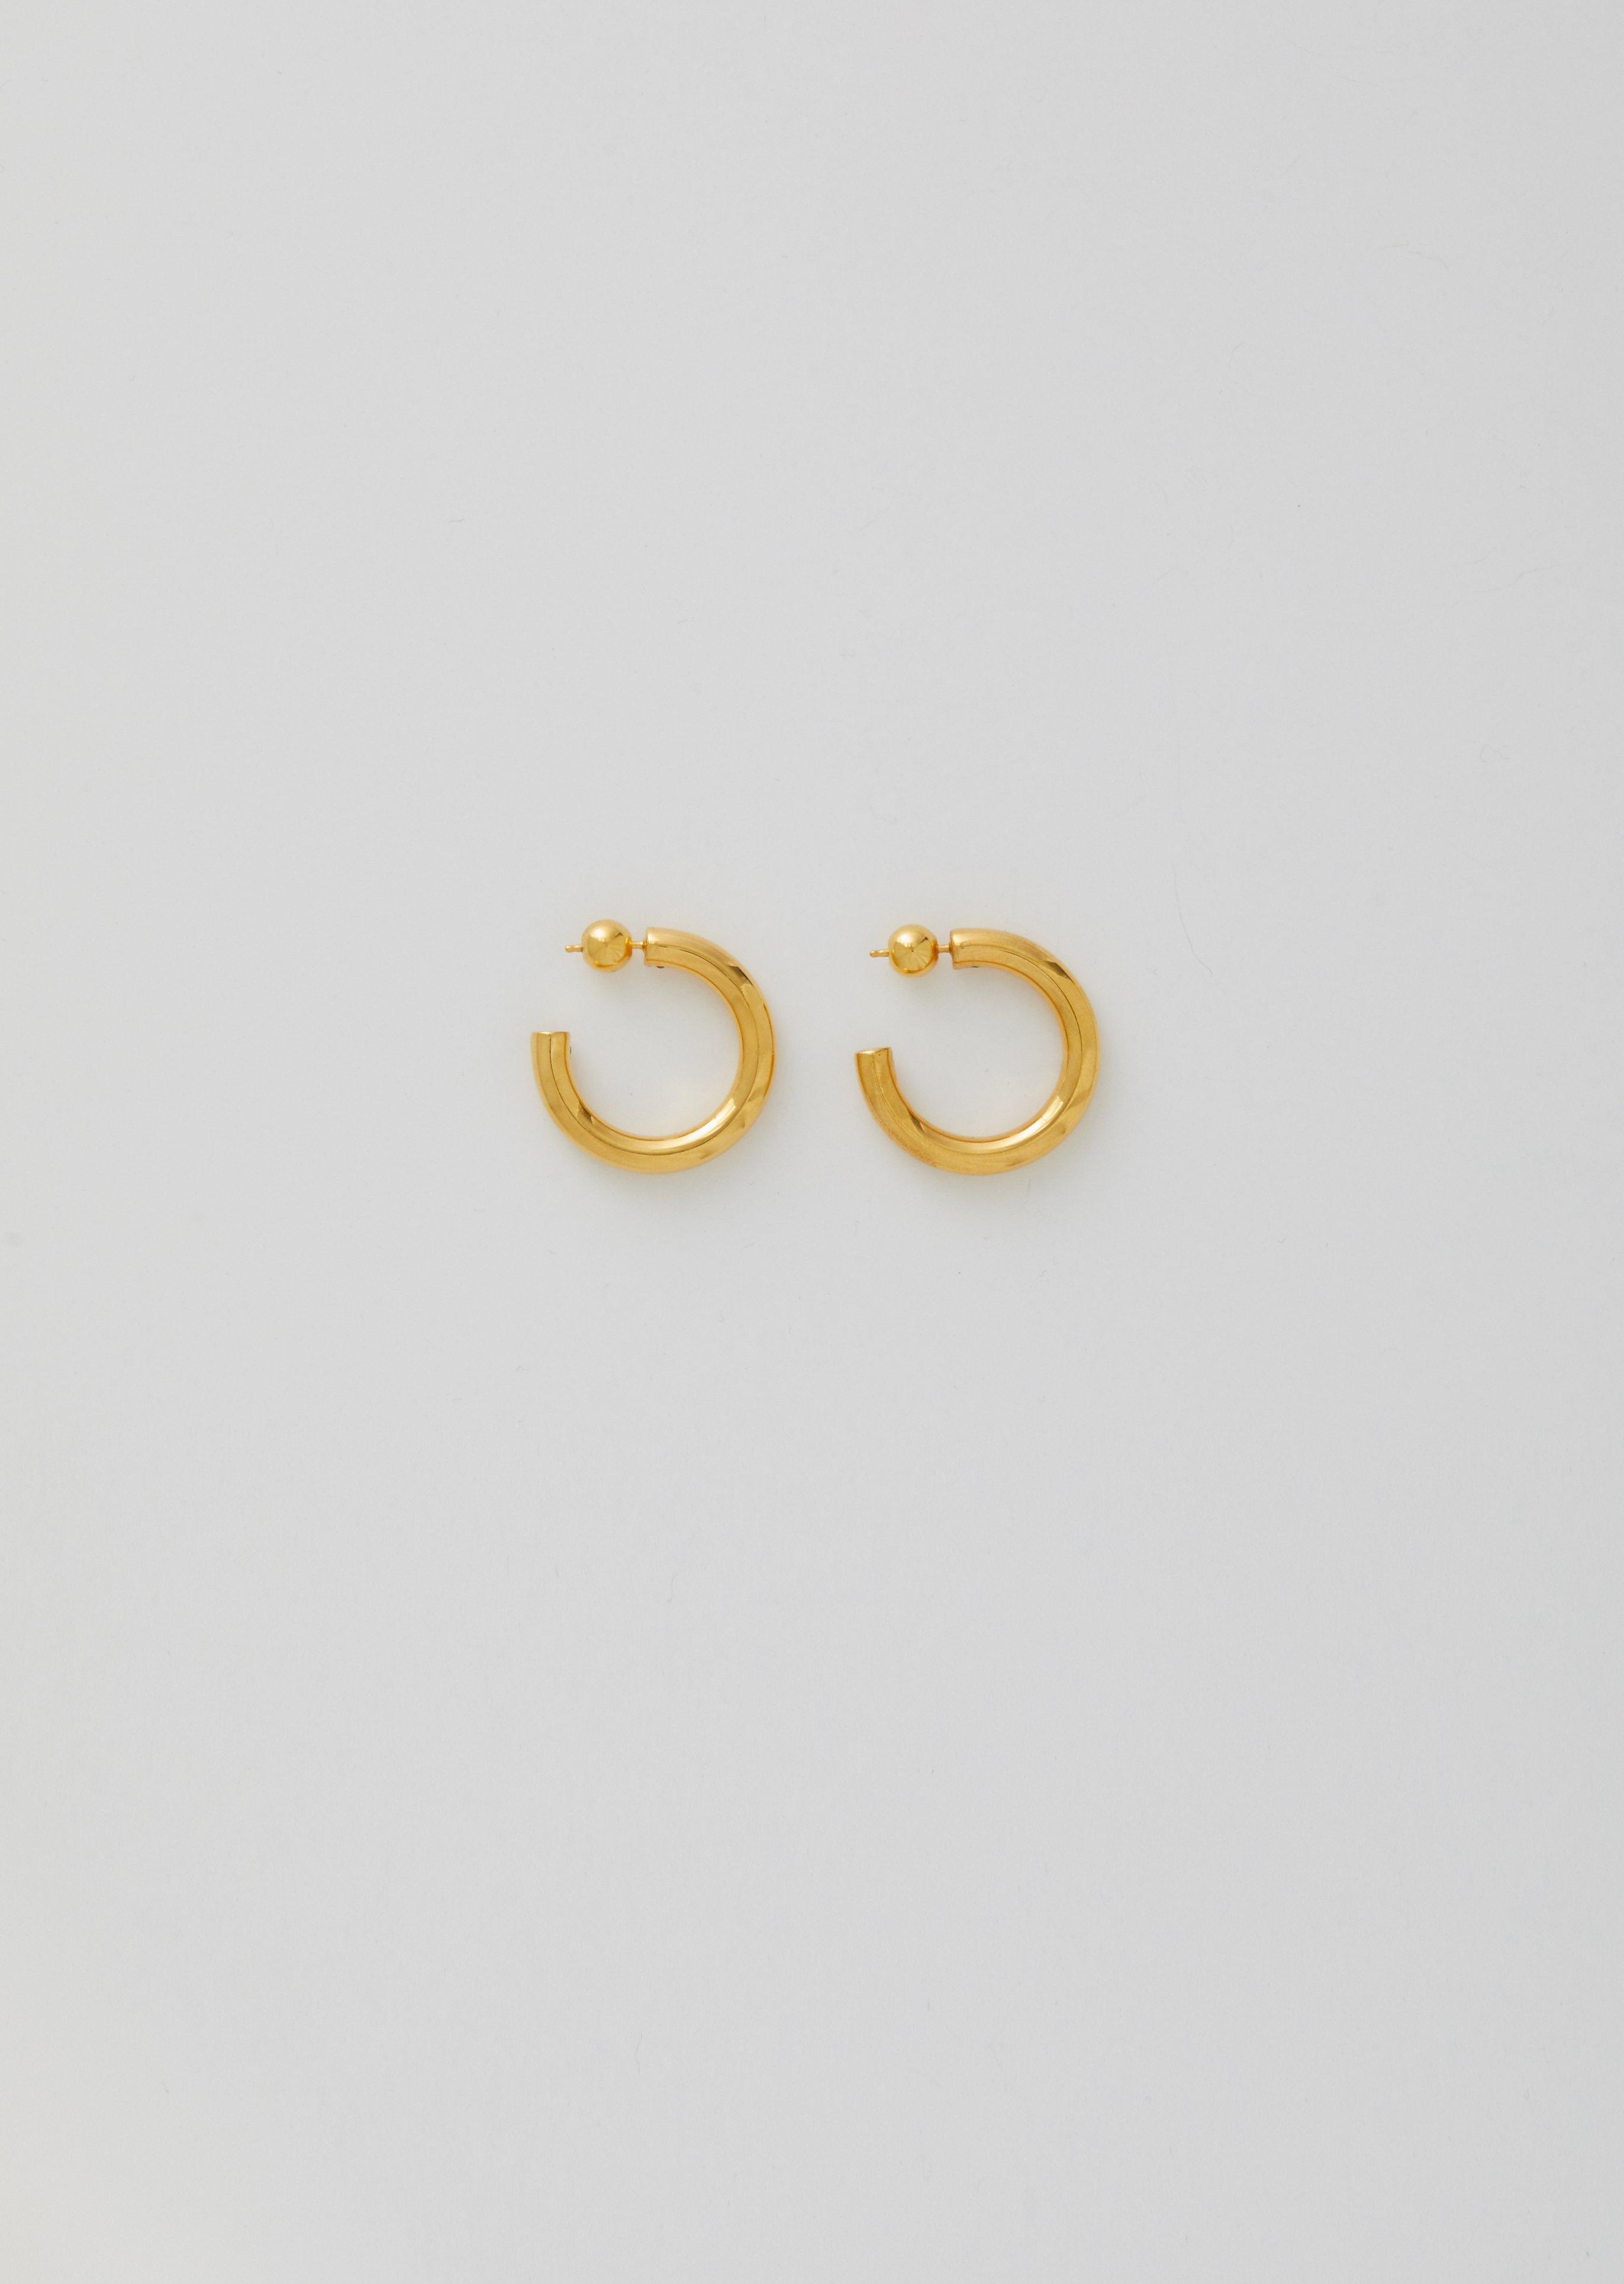 Sophie Buhai Gold Small Everyday Hoops in Metallic - Lyst